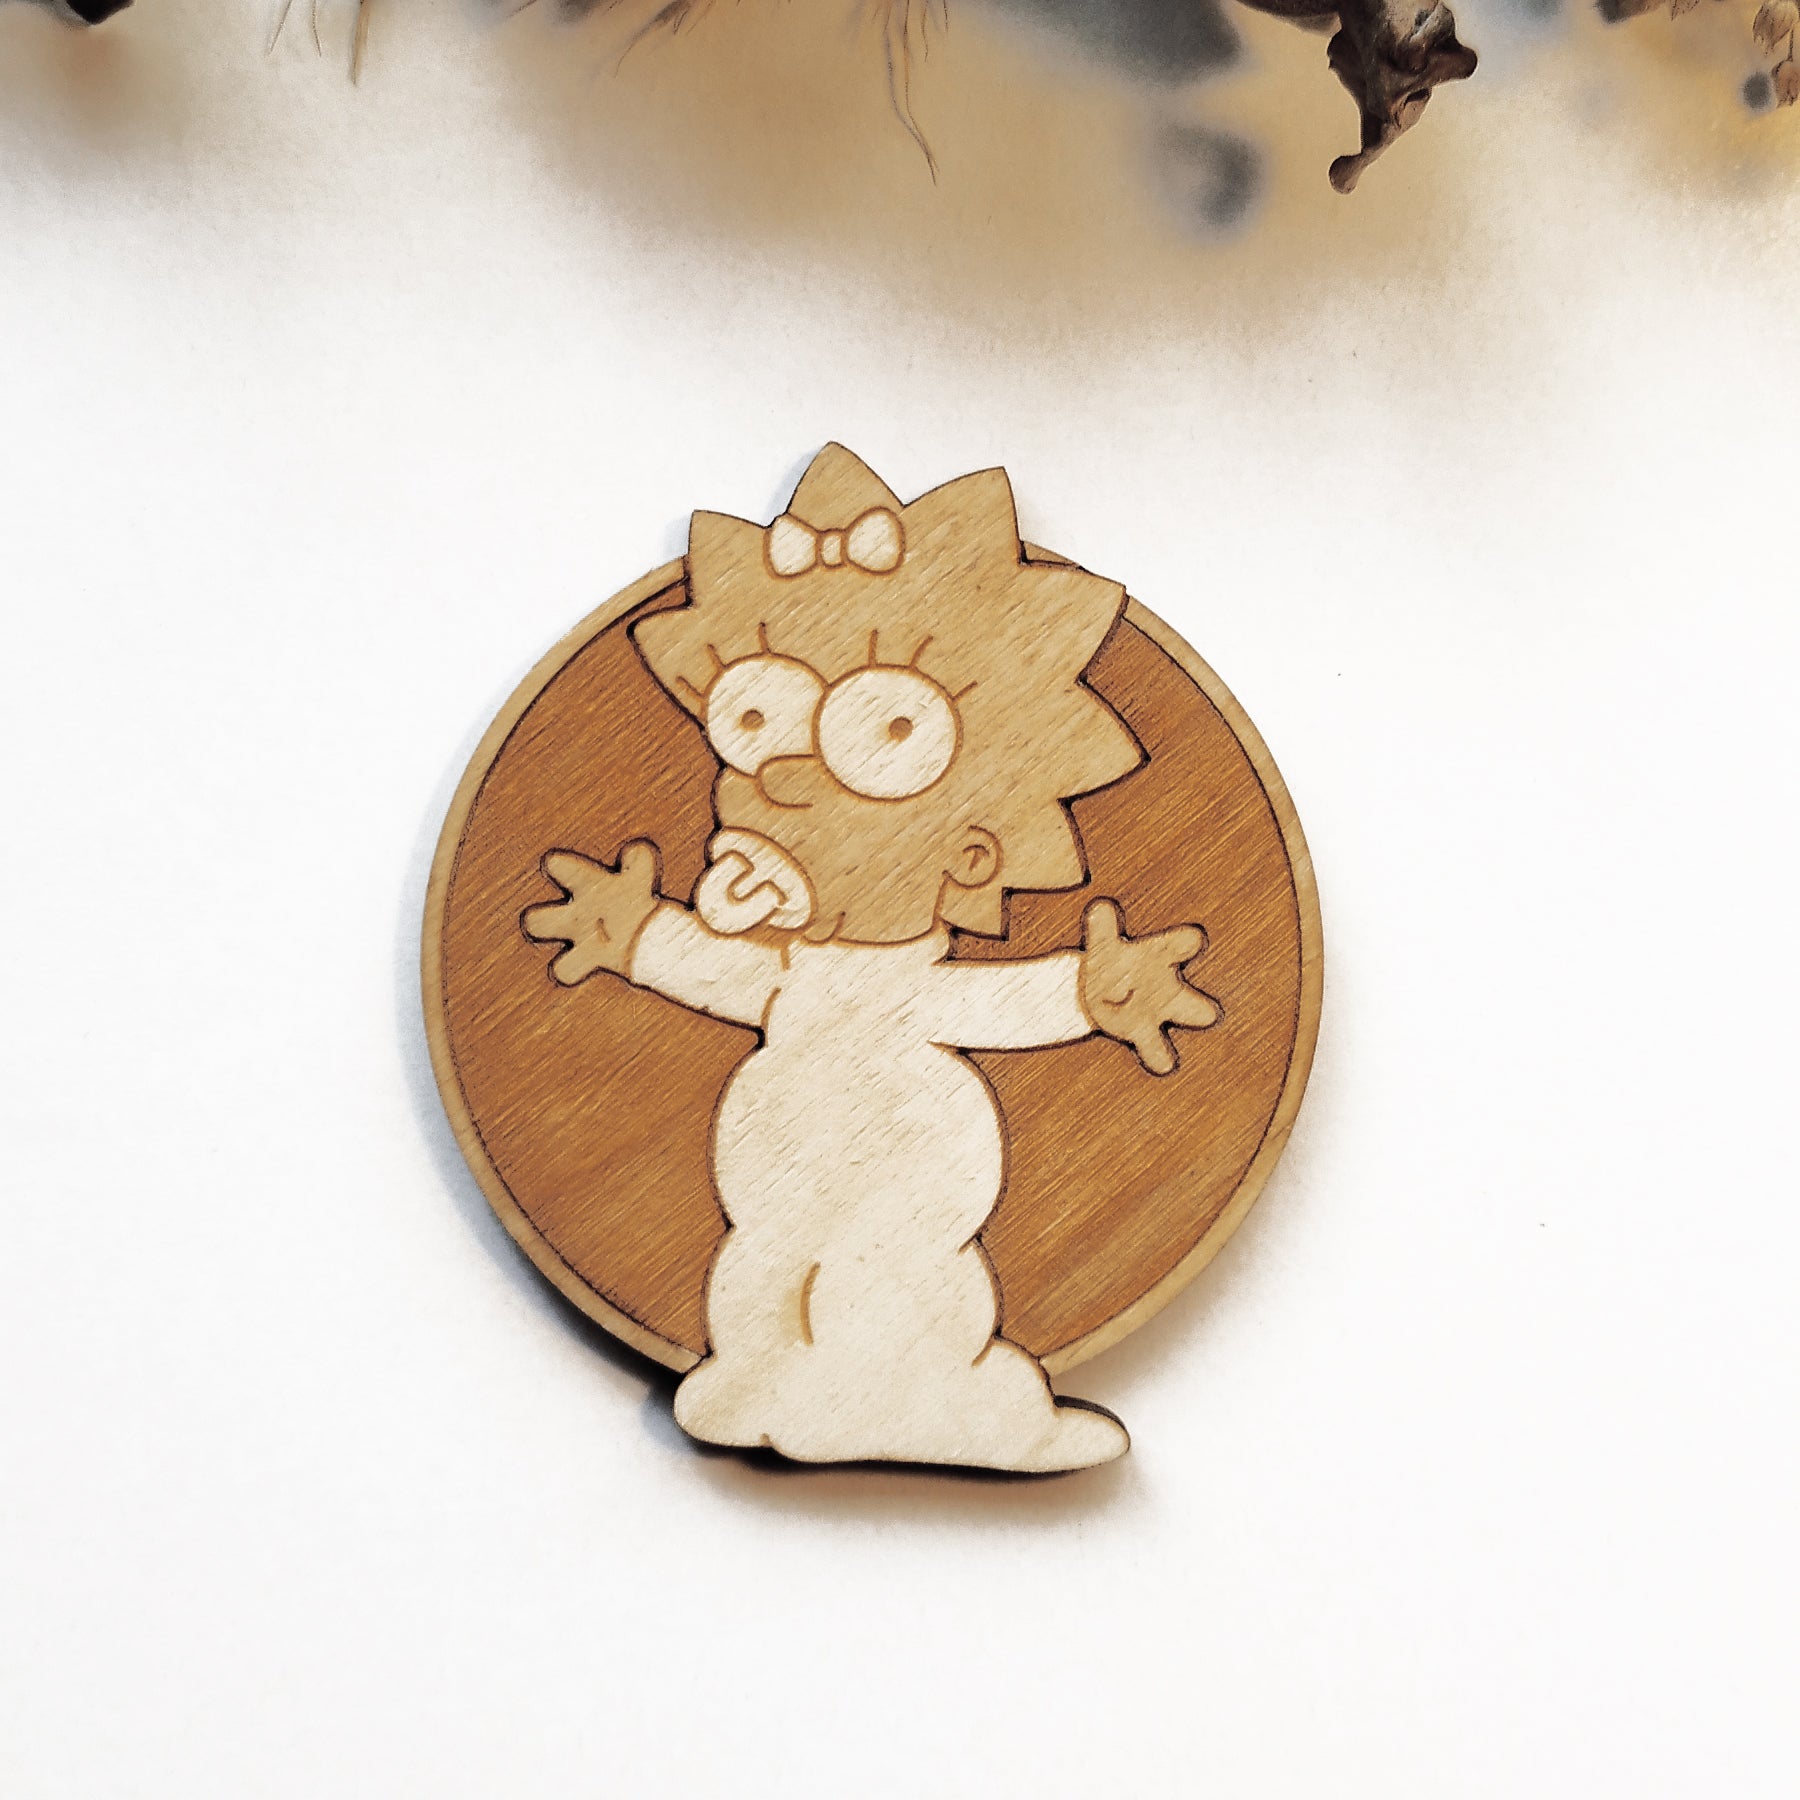 Set of 6 The Simpsons Wooden Coasters - Handmade Gift - Housewarming - Wood Kitchenware-4